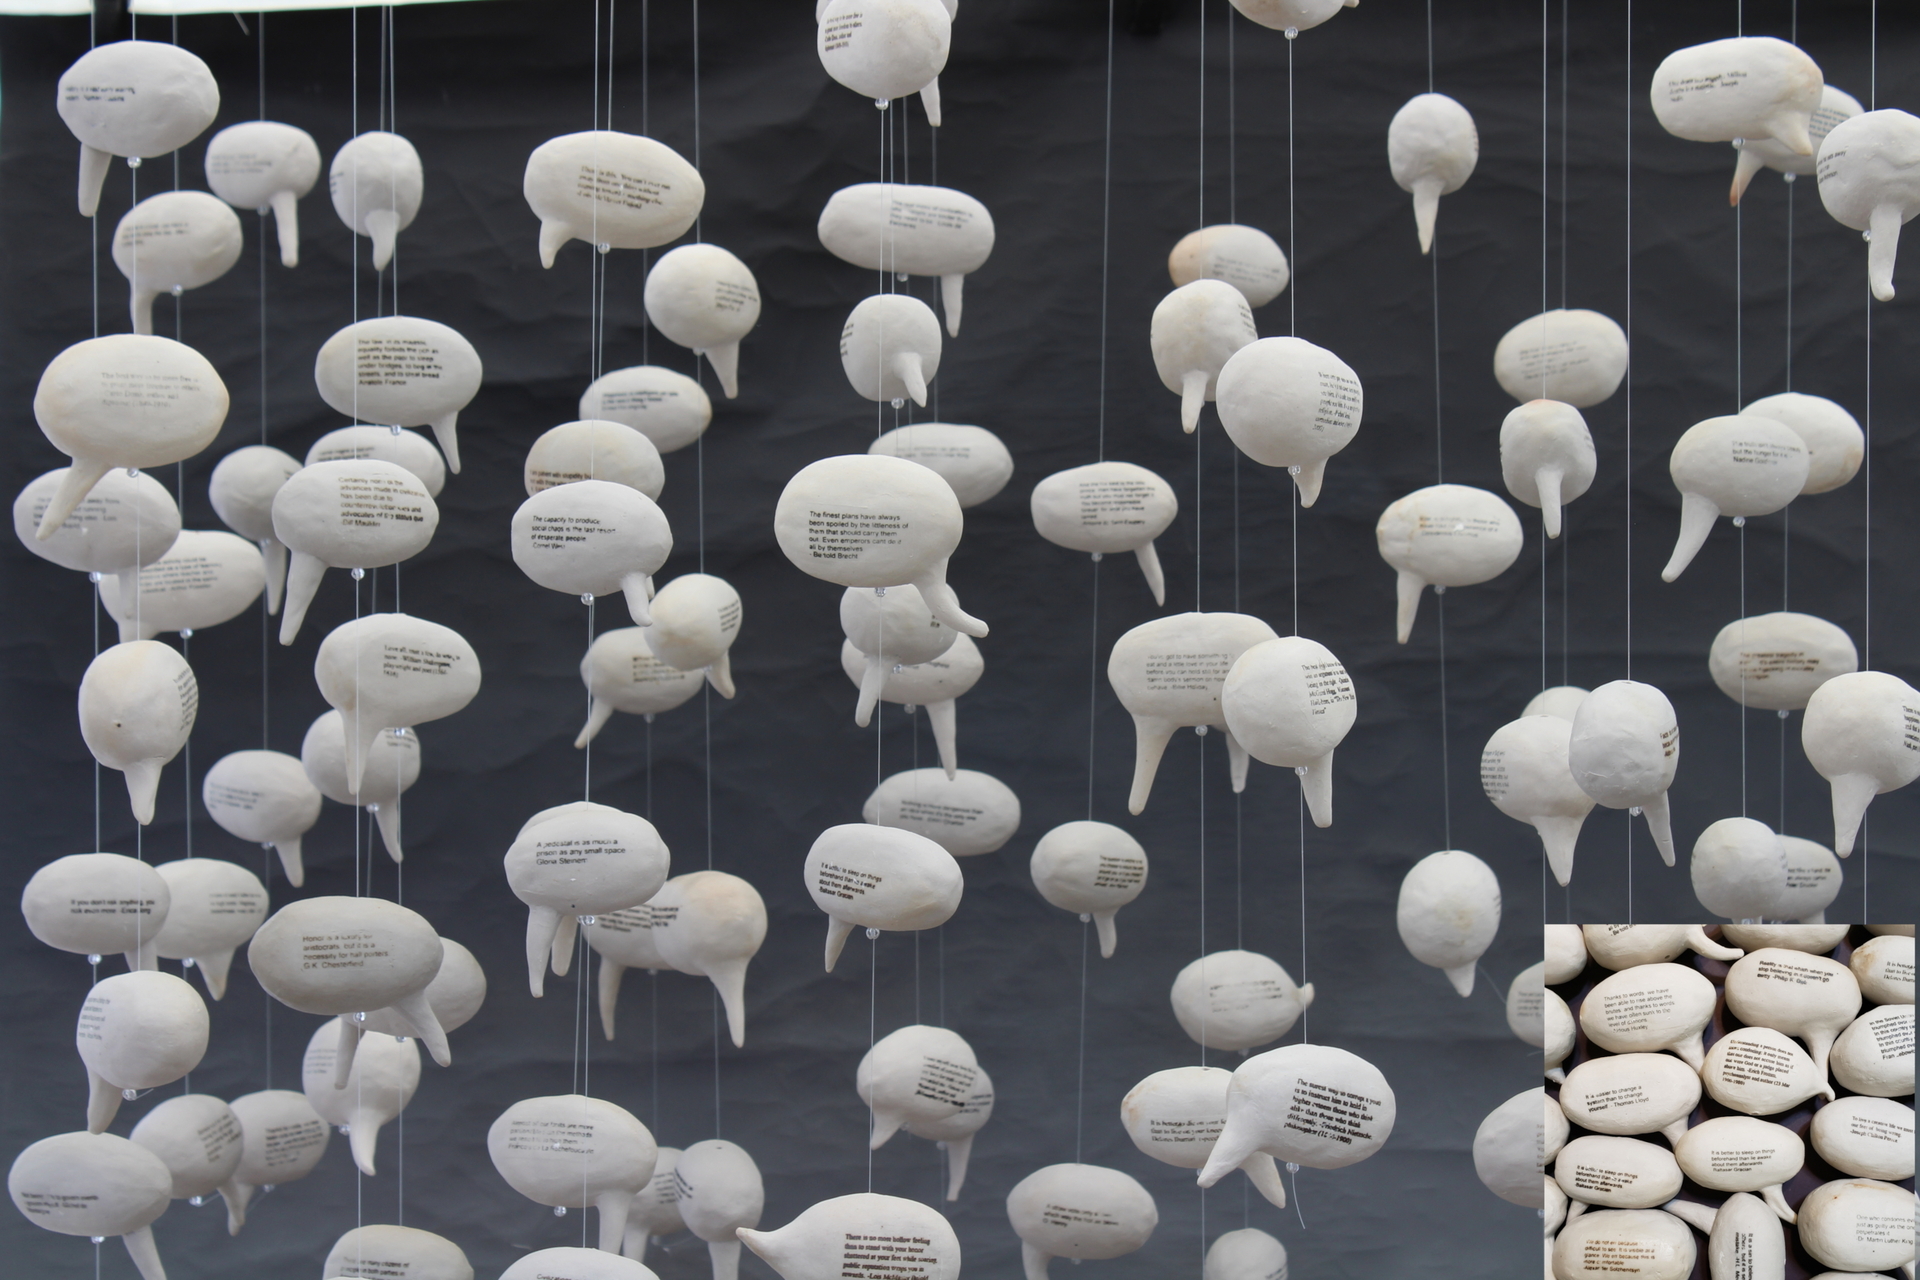 Marie Nagy created porcelain suspended thought balloons for permanently preserving thoughts and ideas.